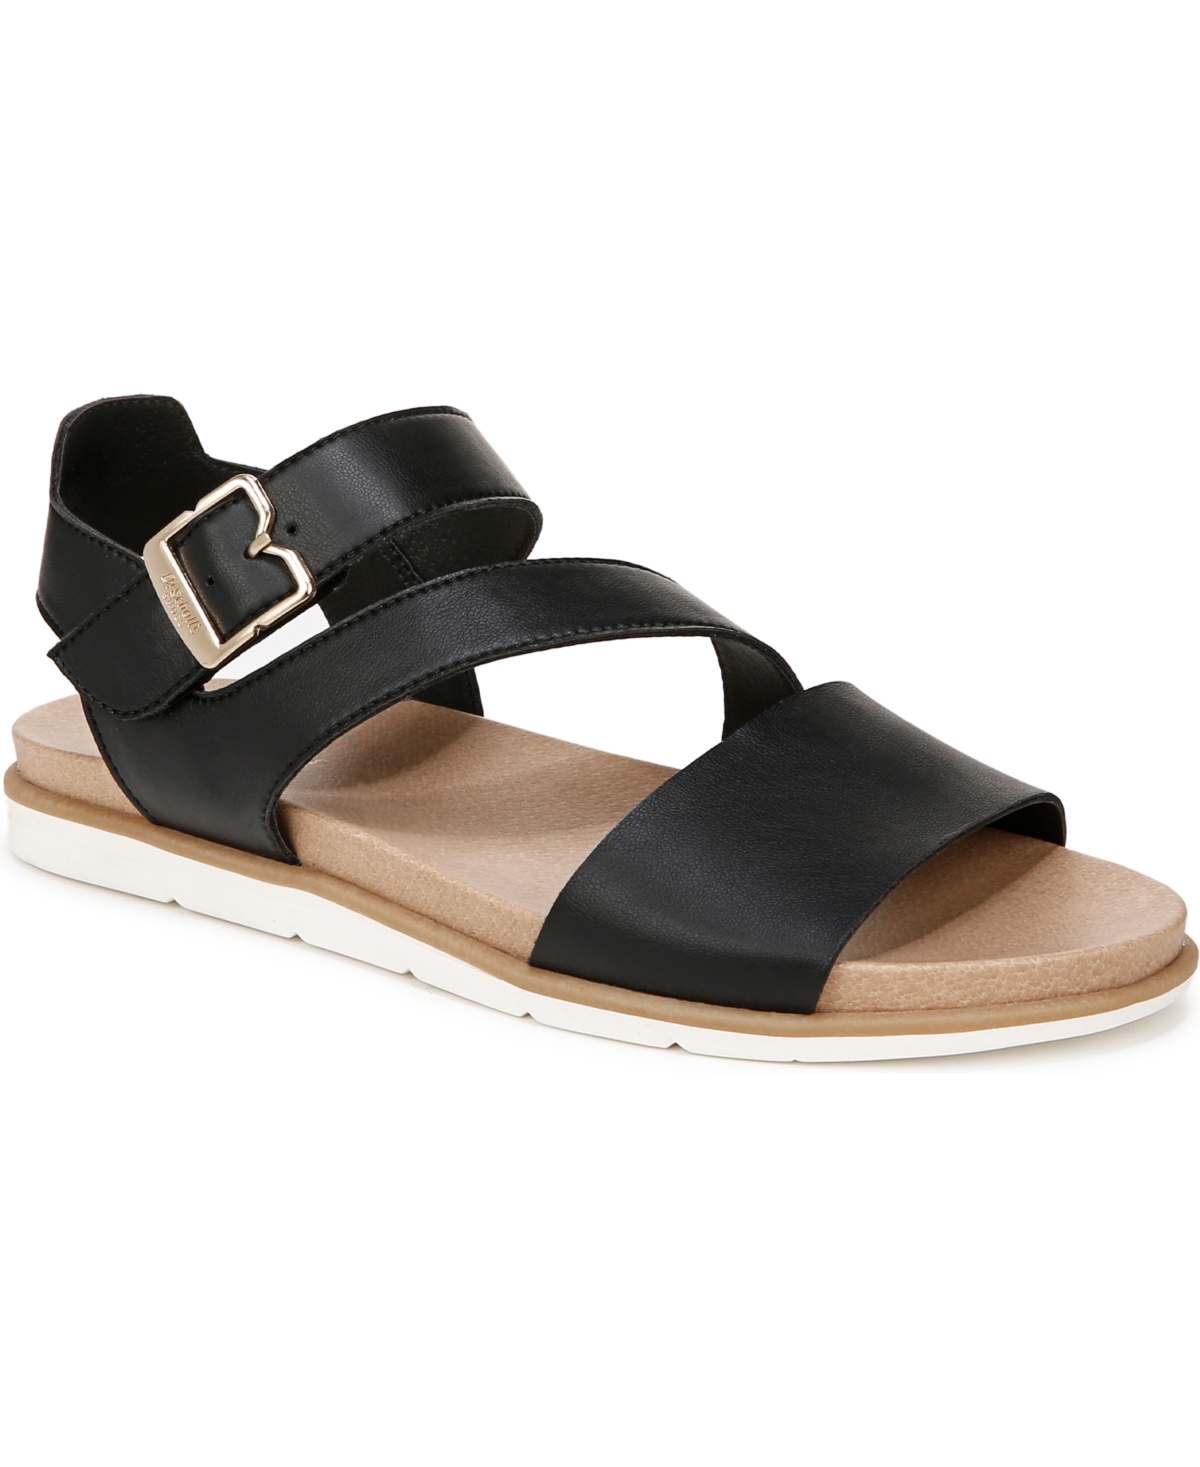 Dr. Scholl's Women's Nicely Fun Strappy Sandals In Black Faux Leather